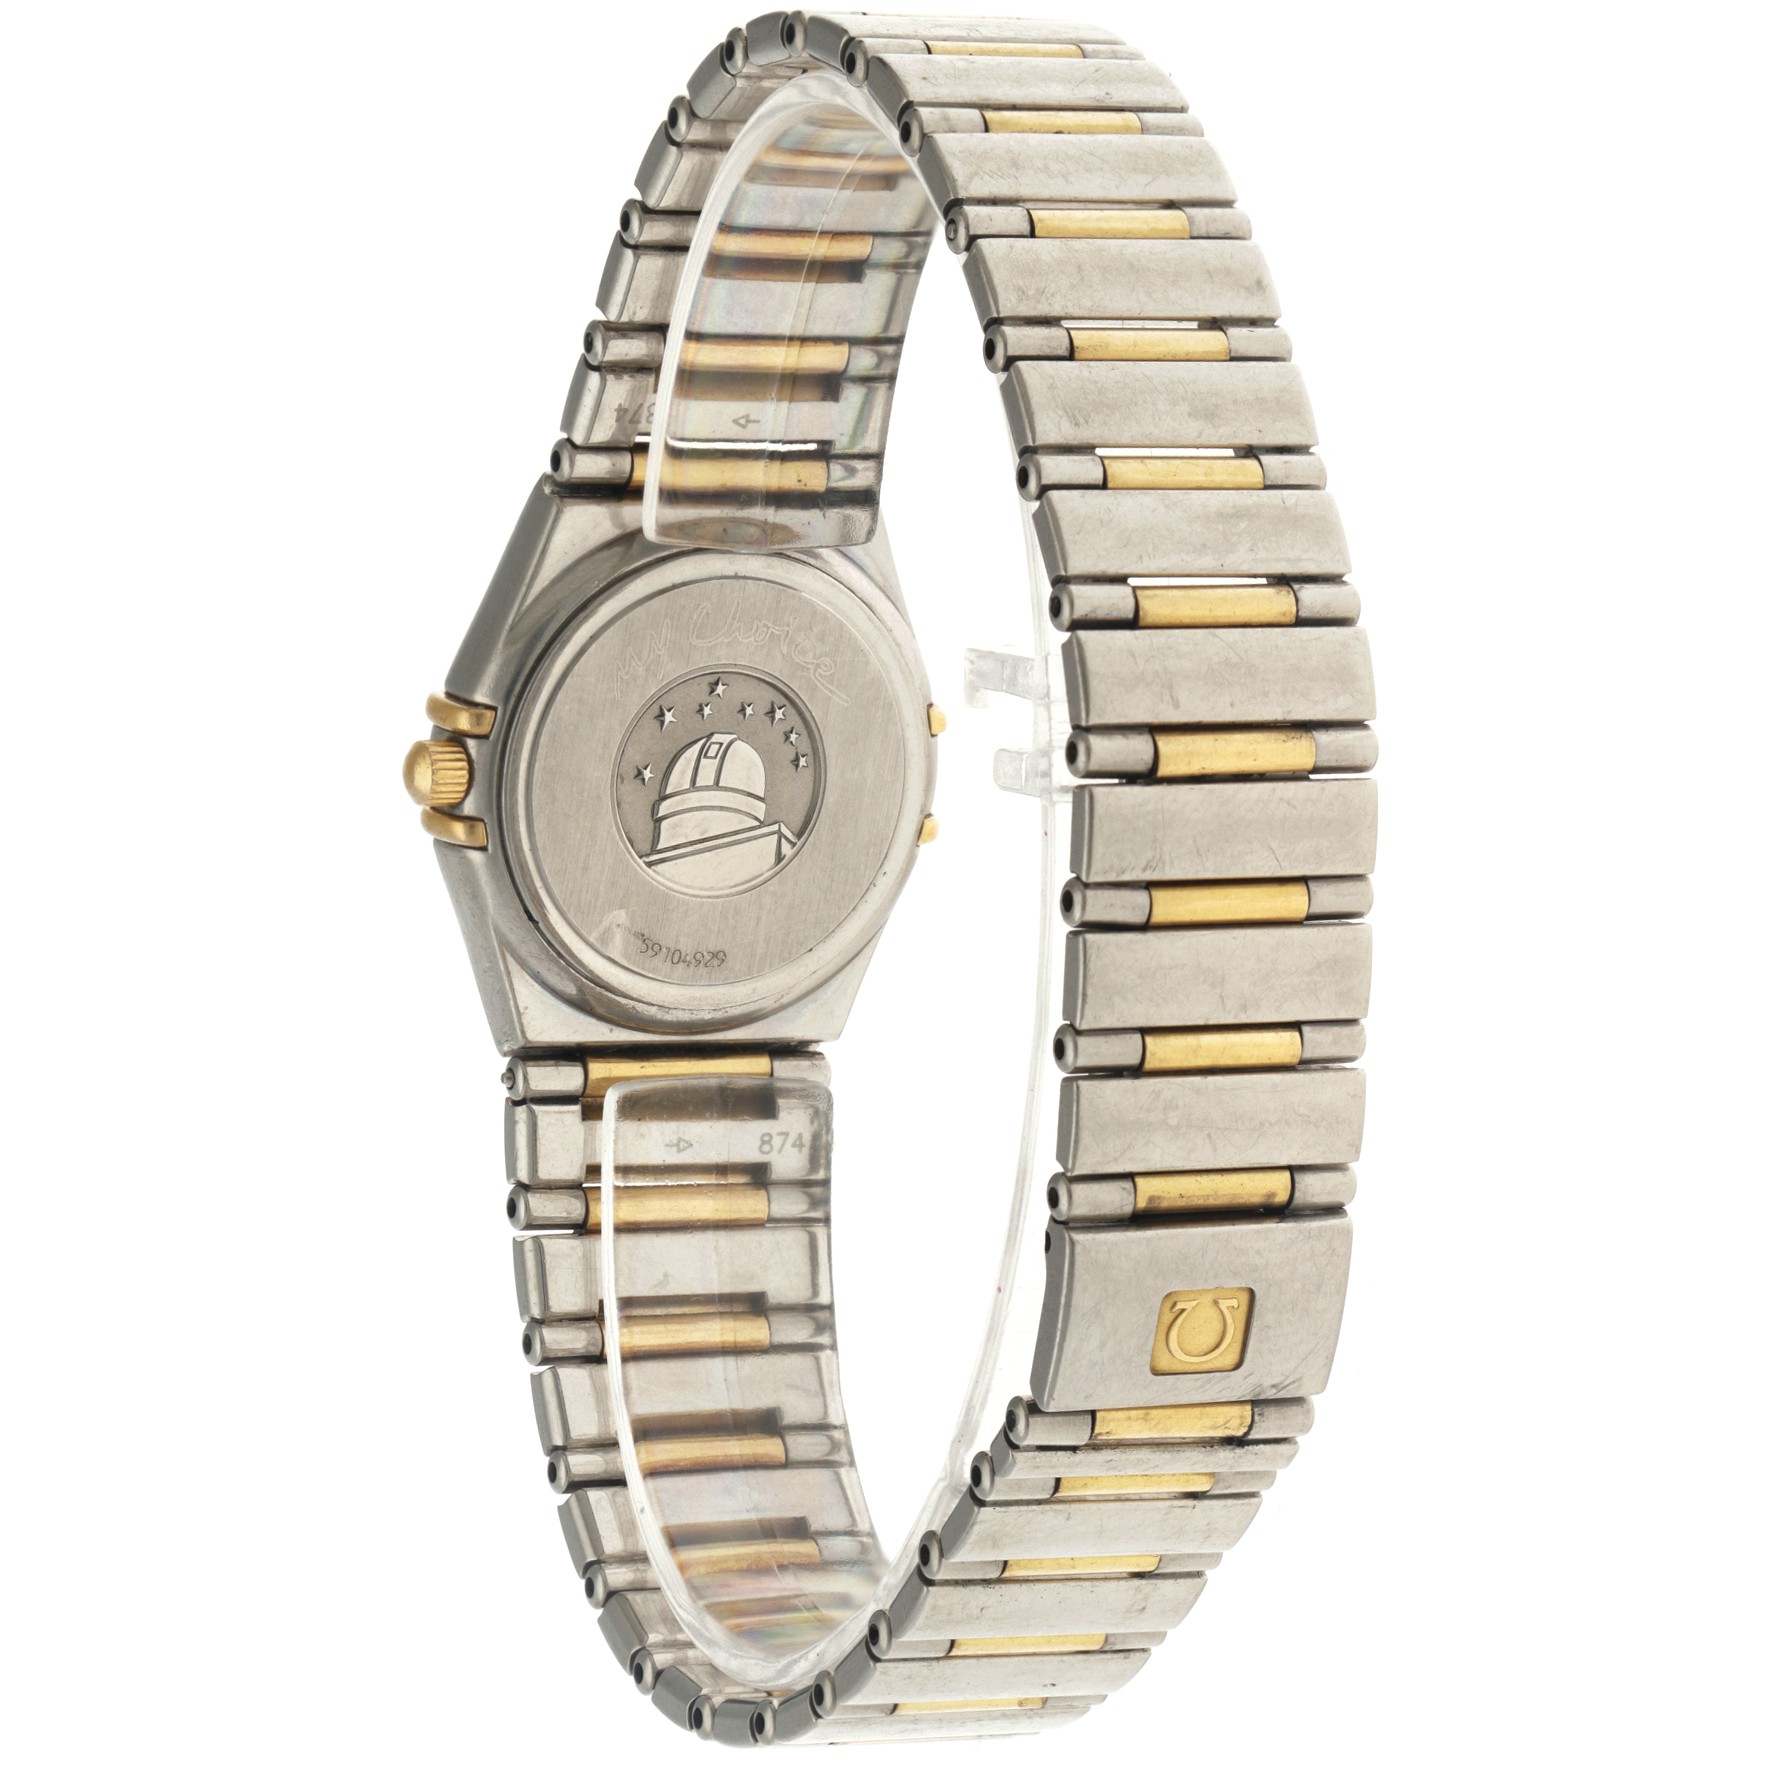 No Reserve - Omega Constellation Ladies 'My Choice' Mother of Pearl 795.1241 - Ladies watch. - Image 3 of 5